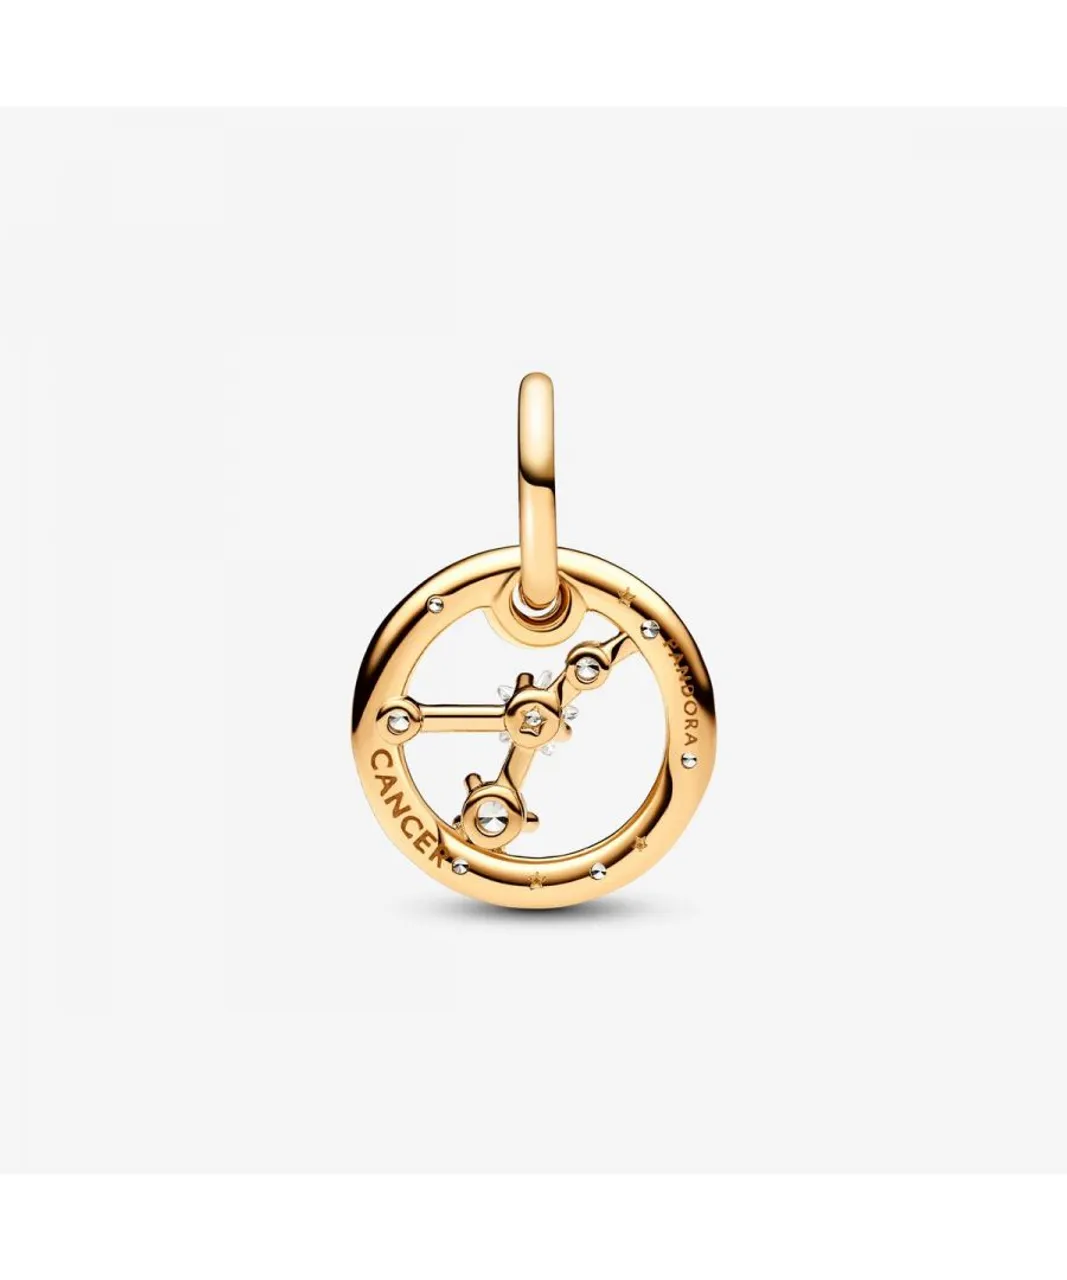 Pandora 'Zodiac Sign' WoMens Gold Plated Metal Charm - 762708C01 Gold Tone - One Size